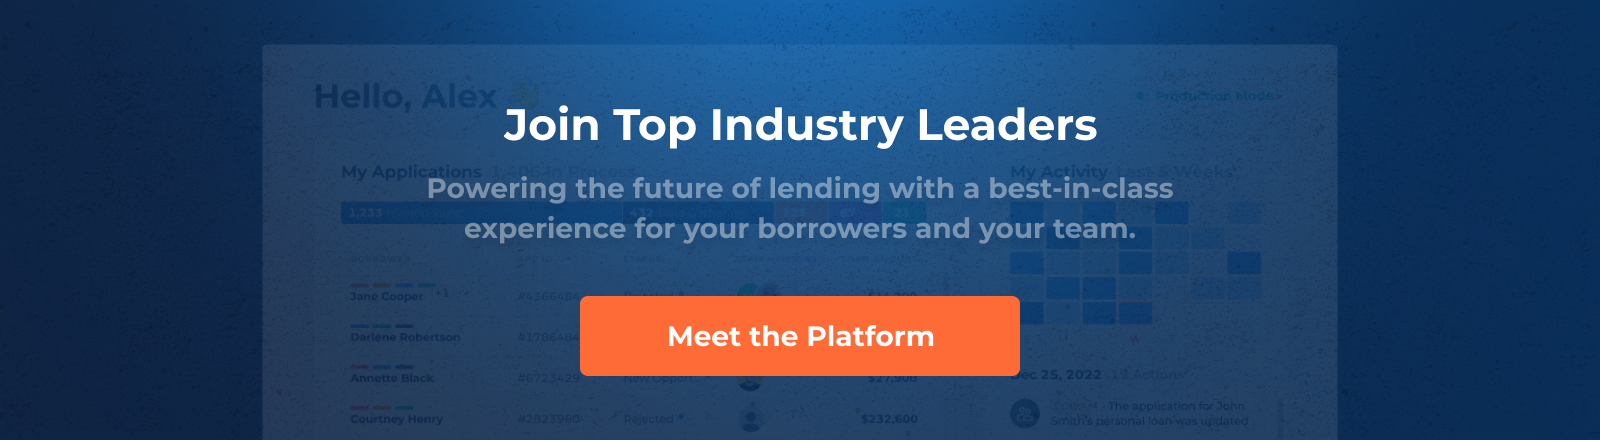 Powering the future of lending